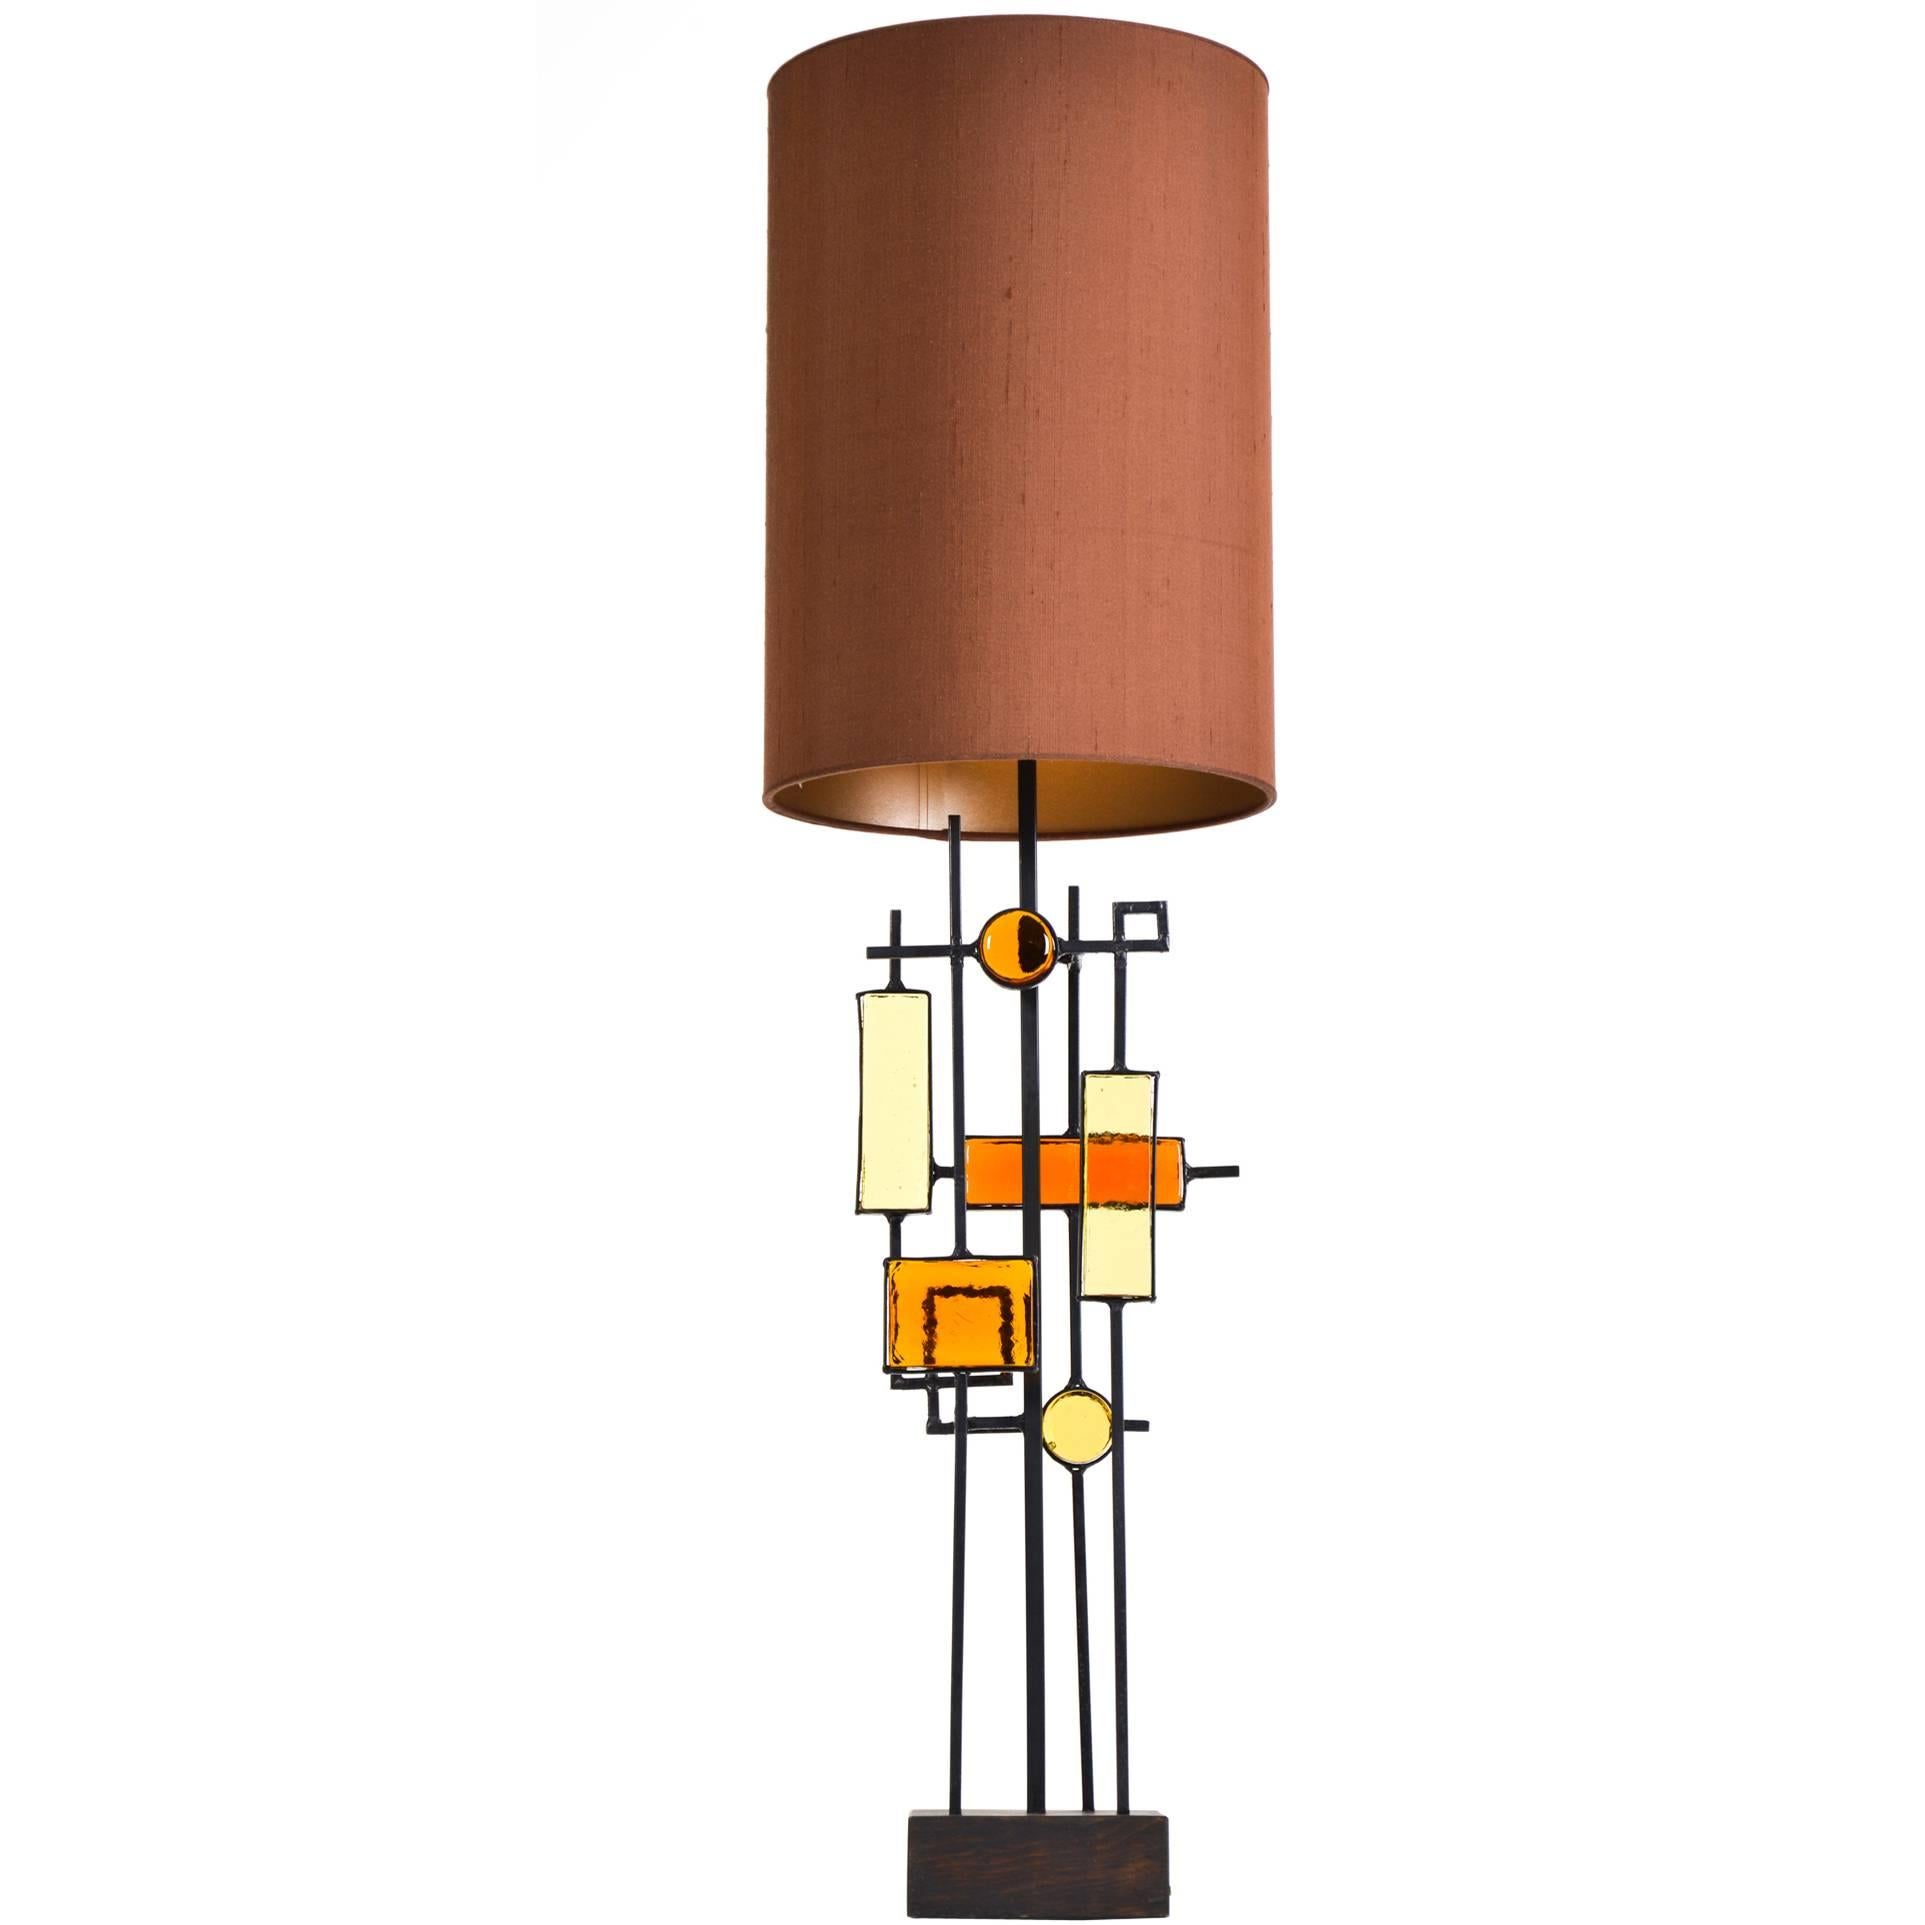 Tall Sculptural Table Lamp by Svend Aage Holm Sorensen, Denmark, 1960 For Sale